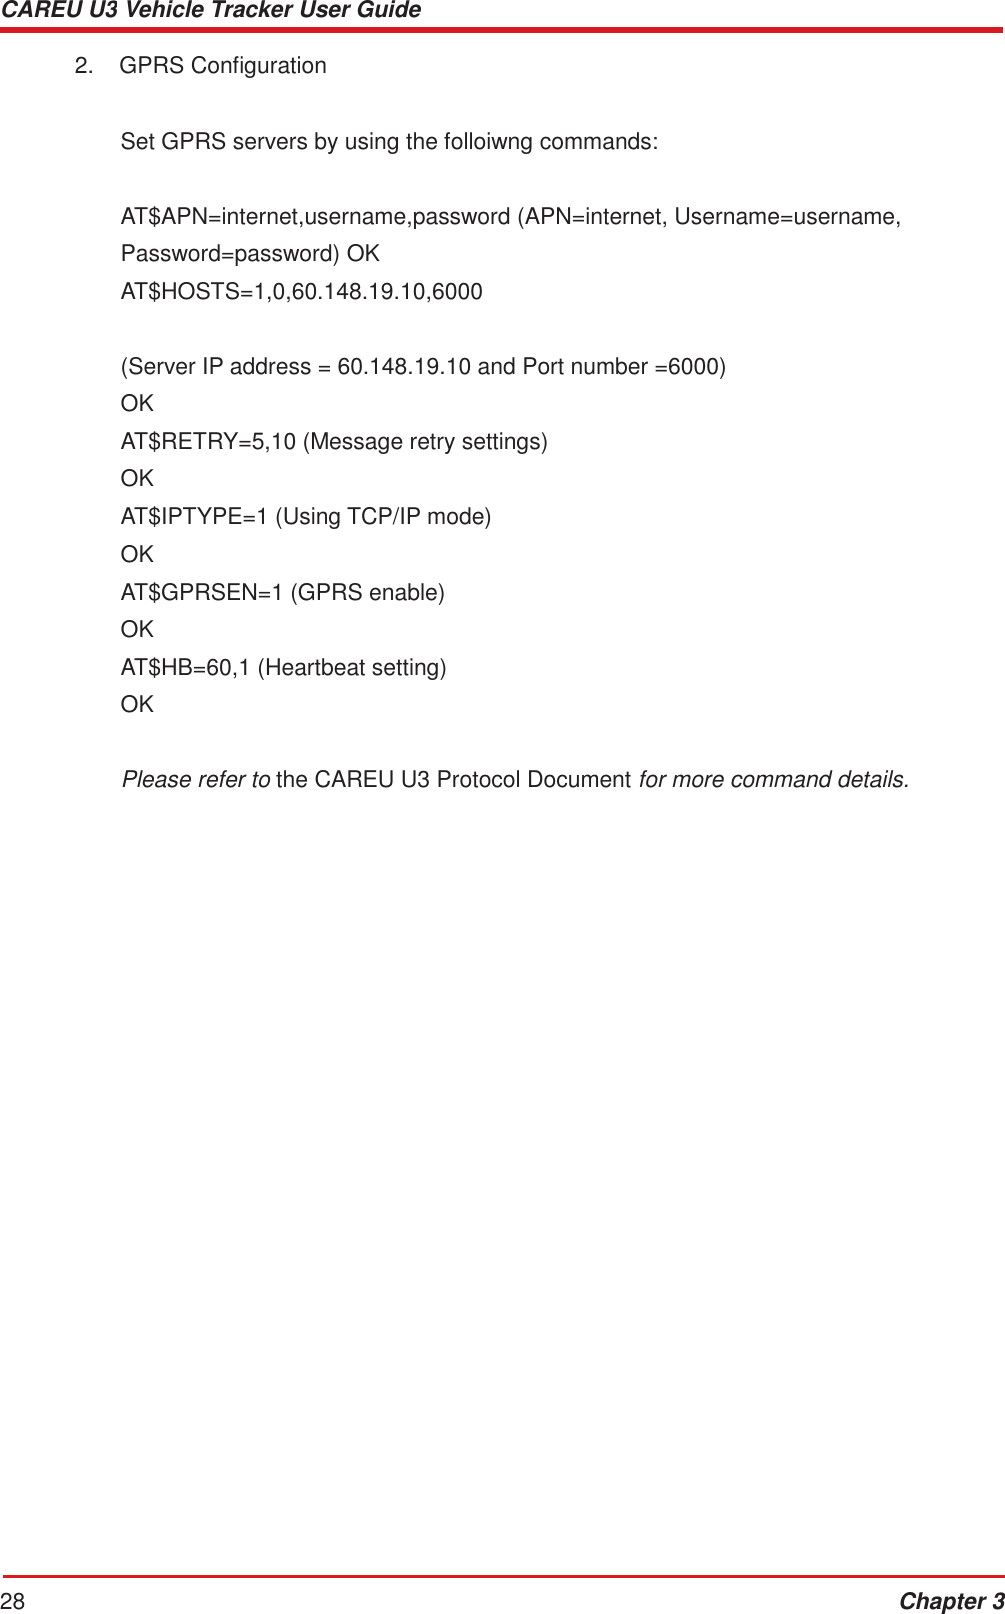 CAREU U3 Vehicle Tracker User Guide 28 Chapter 3    2.  GPRS Configuration Set GPRS servers by using the folloiwng commands: AT$APN=internet,username,password (APN=internet, Username=username,  Password=password) OK AT$HOSTS=1,0,60.148.19.10,6000   (Server IP address = 60.148.19.10 and Port number =6000) OK AT$RETRY=5,10 (Message retry settings) OK AT$IPTYPE=1 (Using TCP/IP mode) OK AT$GPRSEN=1 (GPRS enable) OK AT$HB=60,1 (Heartbeat setting) OK   Please refer to the CAREU U3 Protocol Document for more command details. 